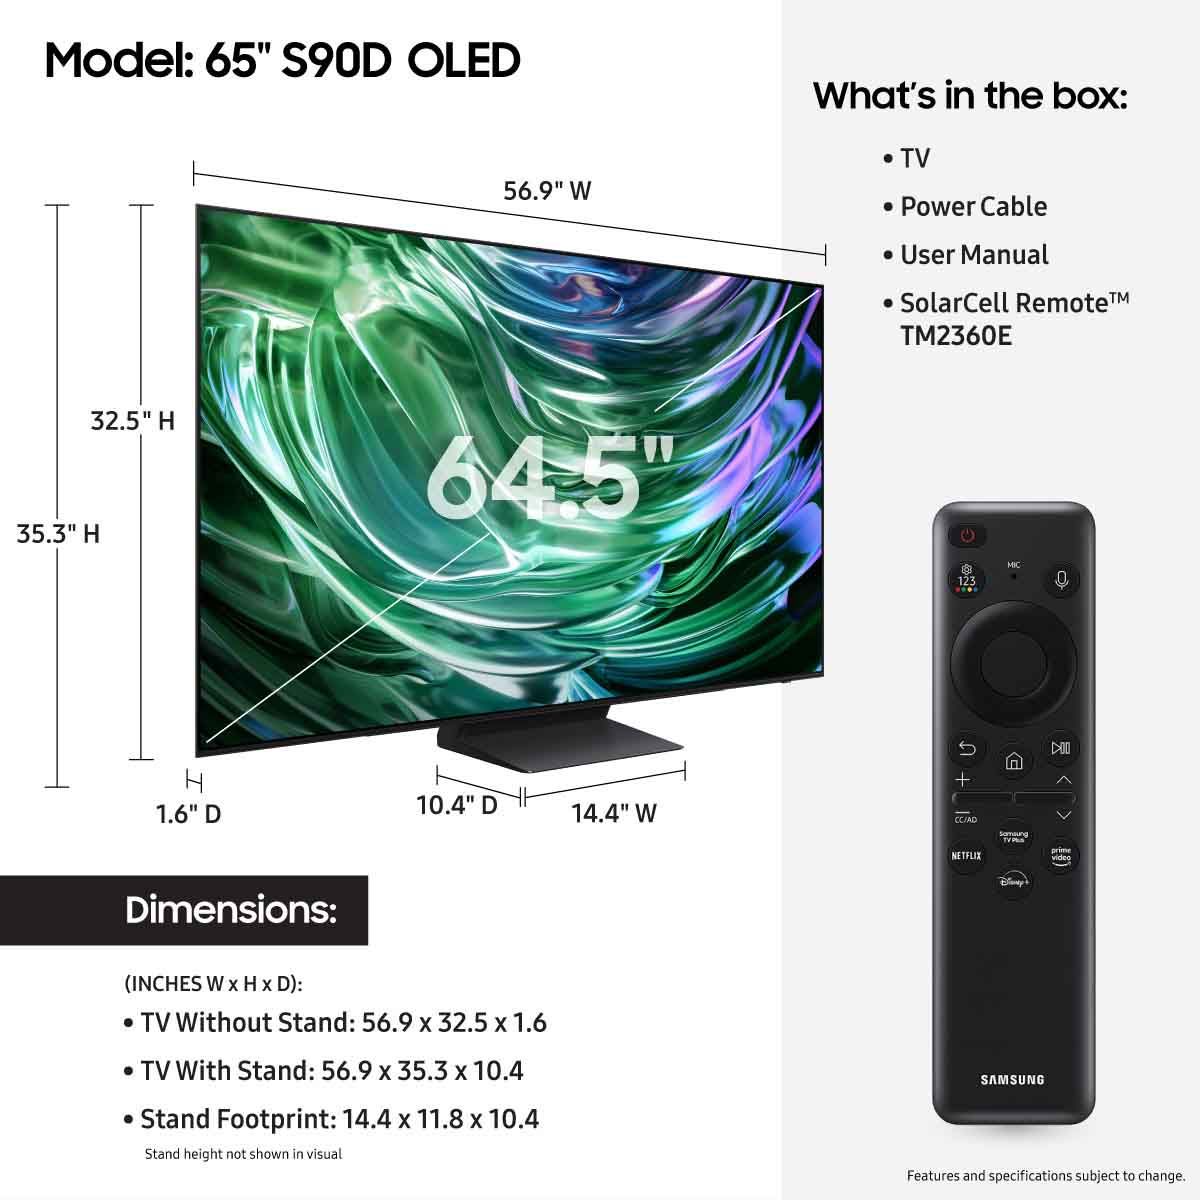 Samsung S90D OLED 4K Smart TV - 65" - dimensions and what's in the box